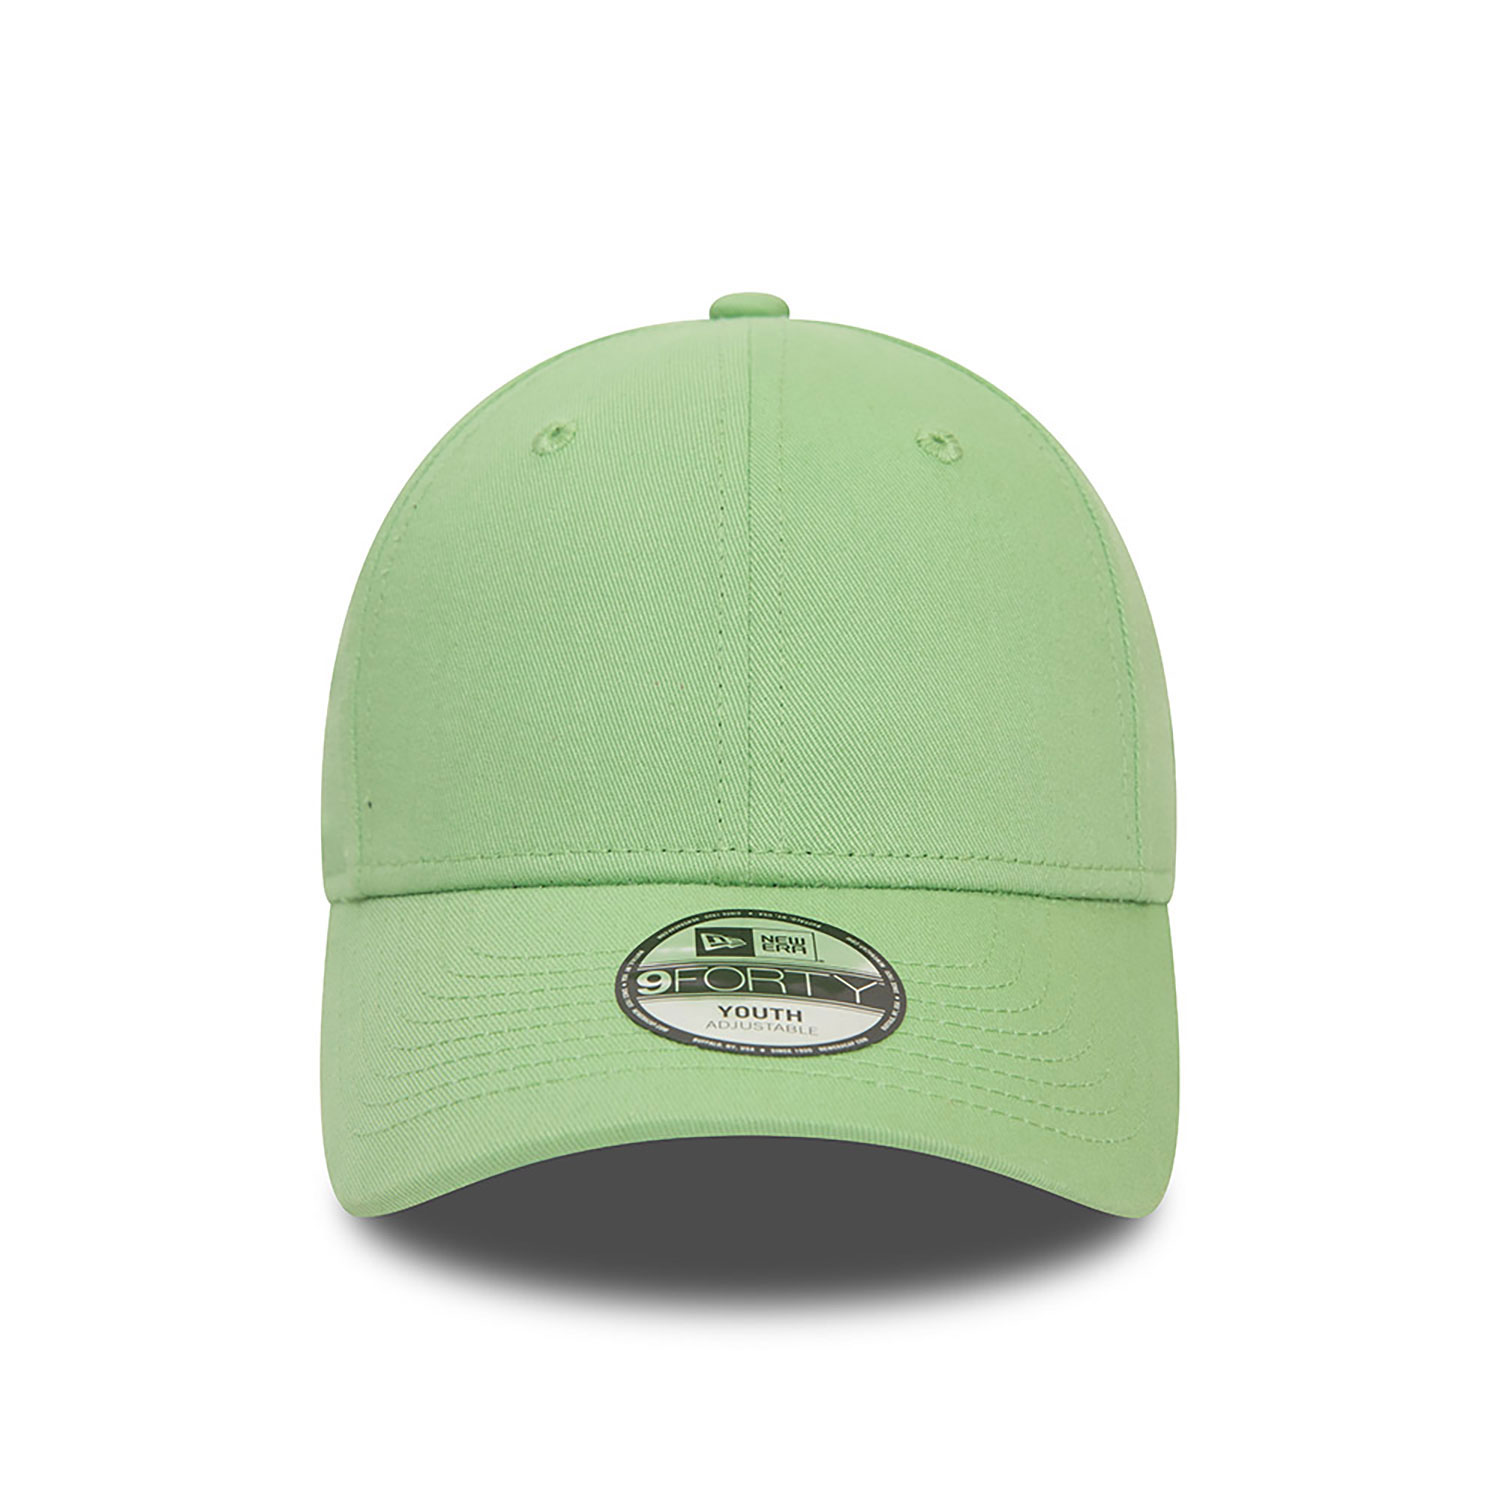 New Era Youth Essential Bright Green 9FORTY Adjustable Cap